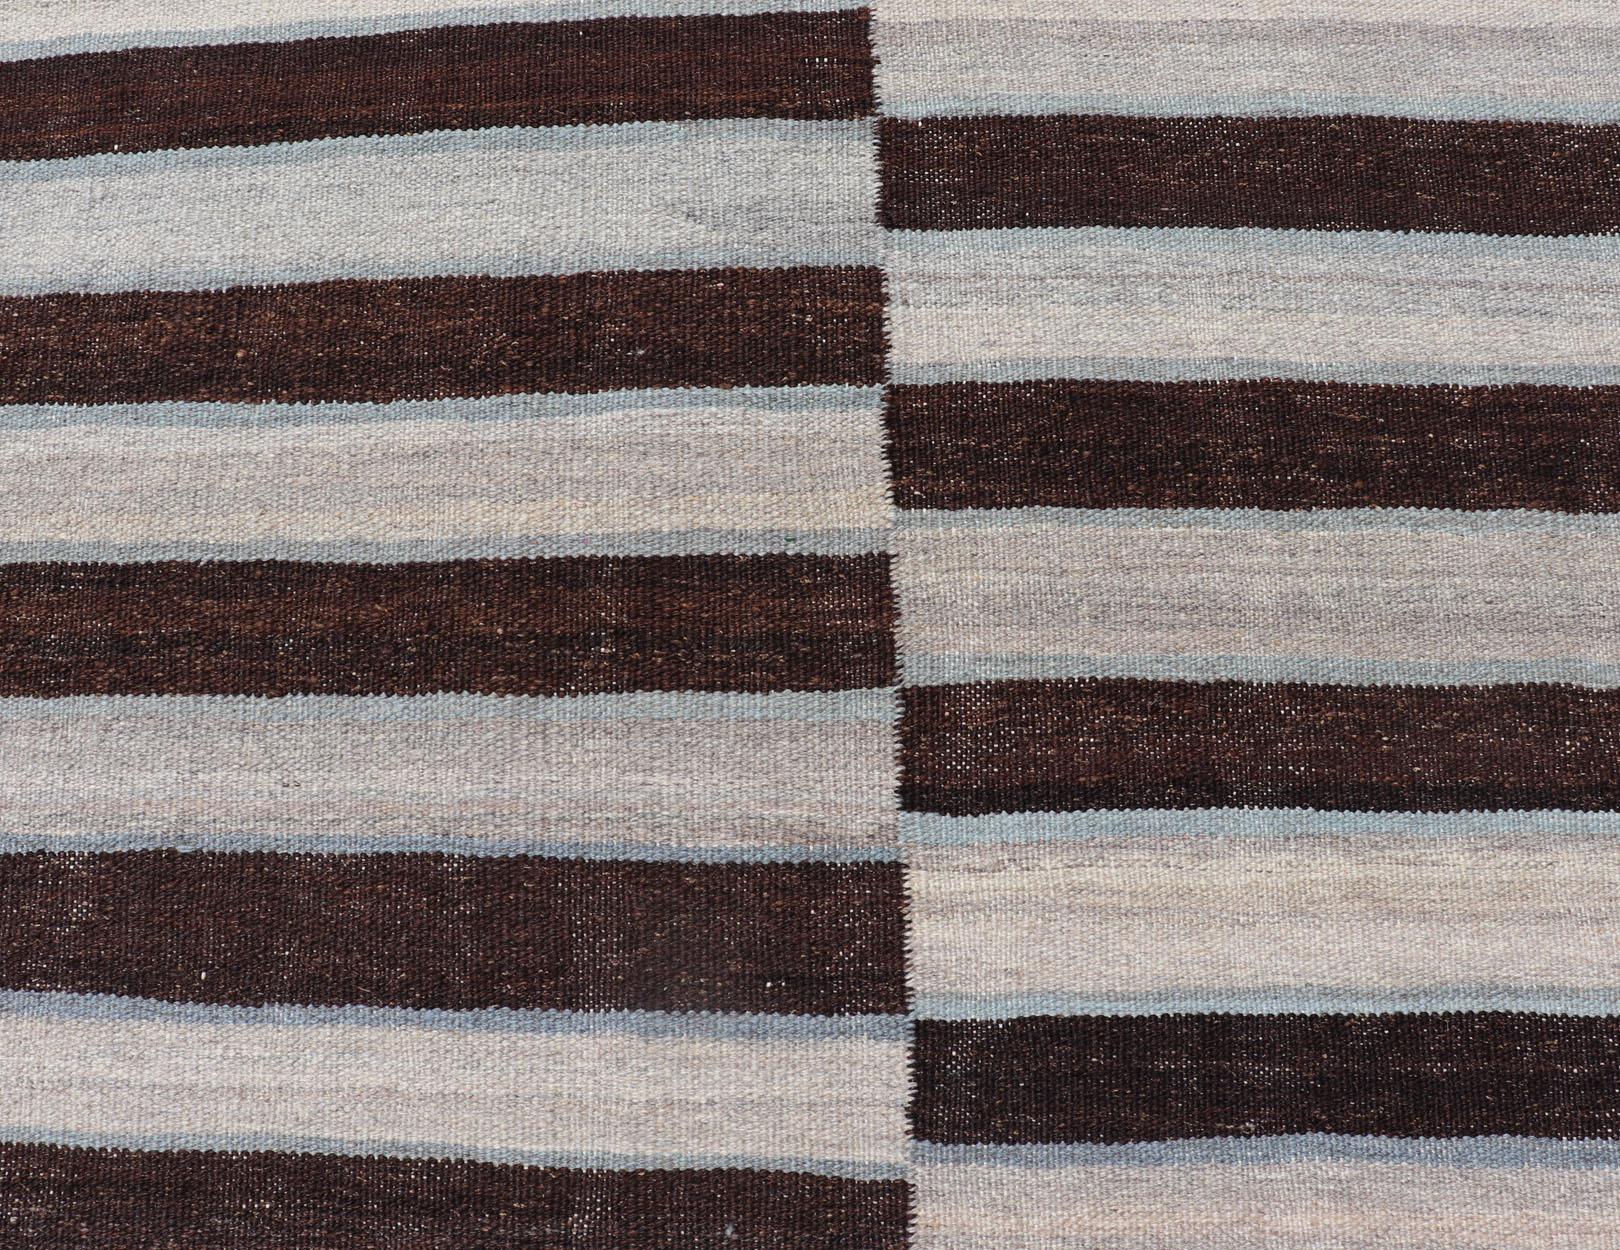 Modern Kilim Rug in Multi-Panel Striped Design with Chocolate Brown, cream  For Sale 2